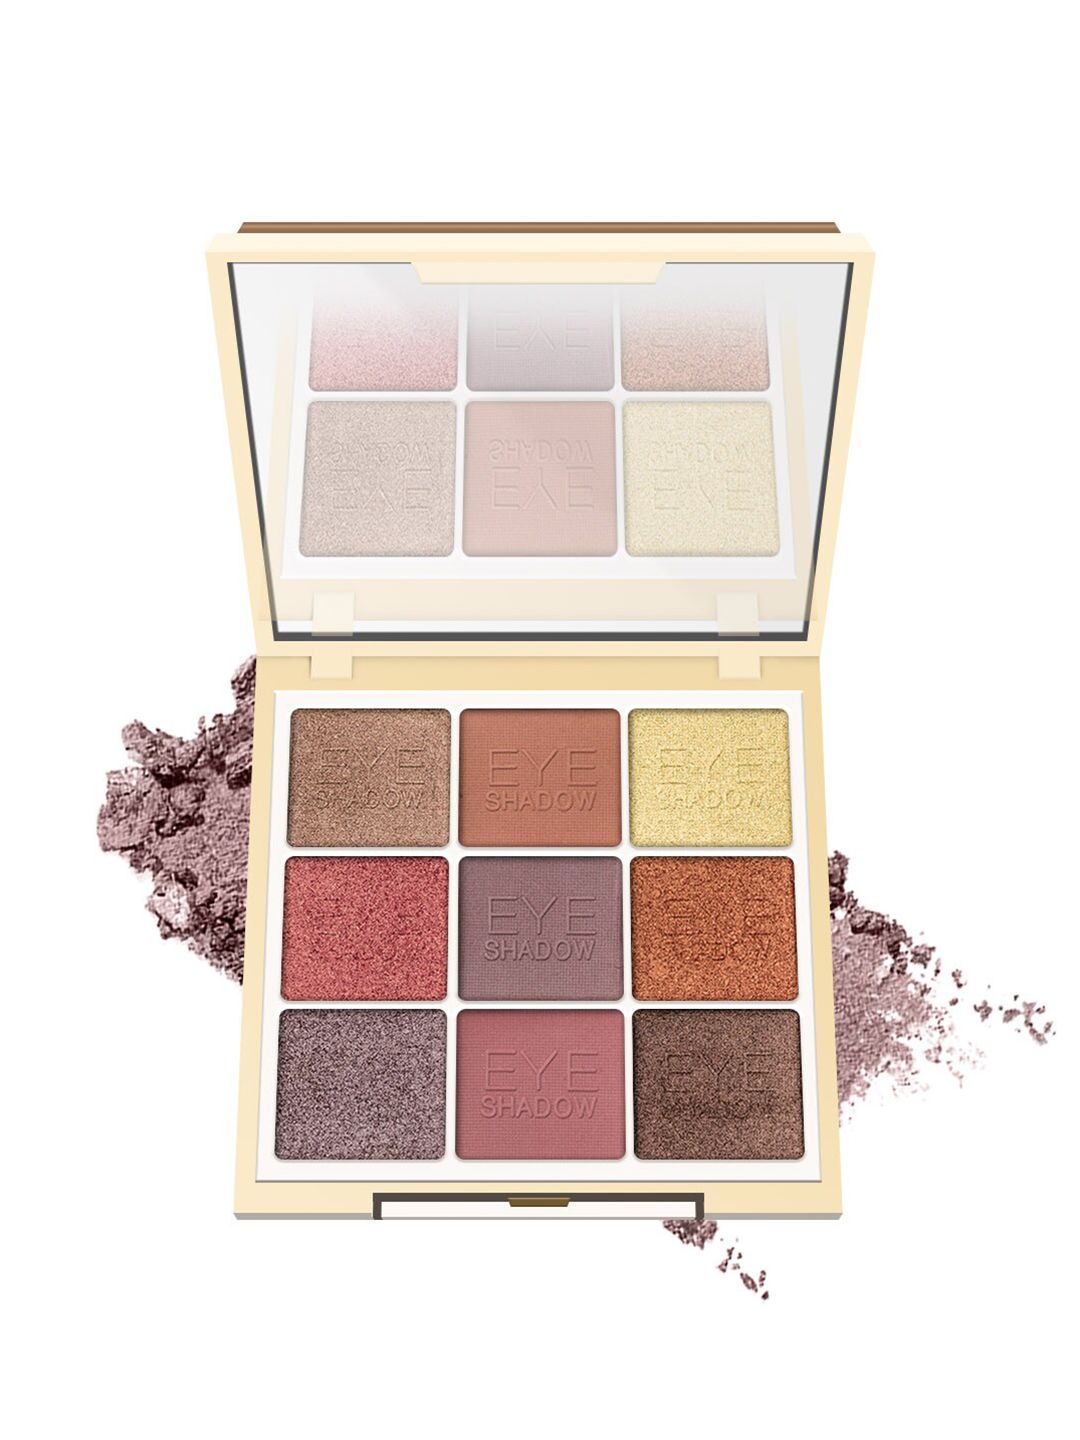 MISS ROSE Metalic 9 Color Matte Eyeshadow Palette 7001-384 M03 Price in India